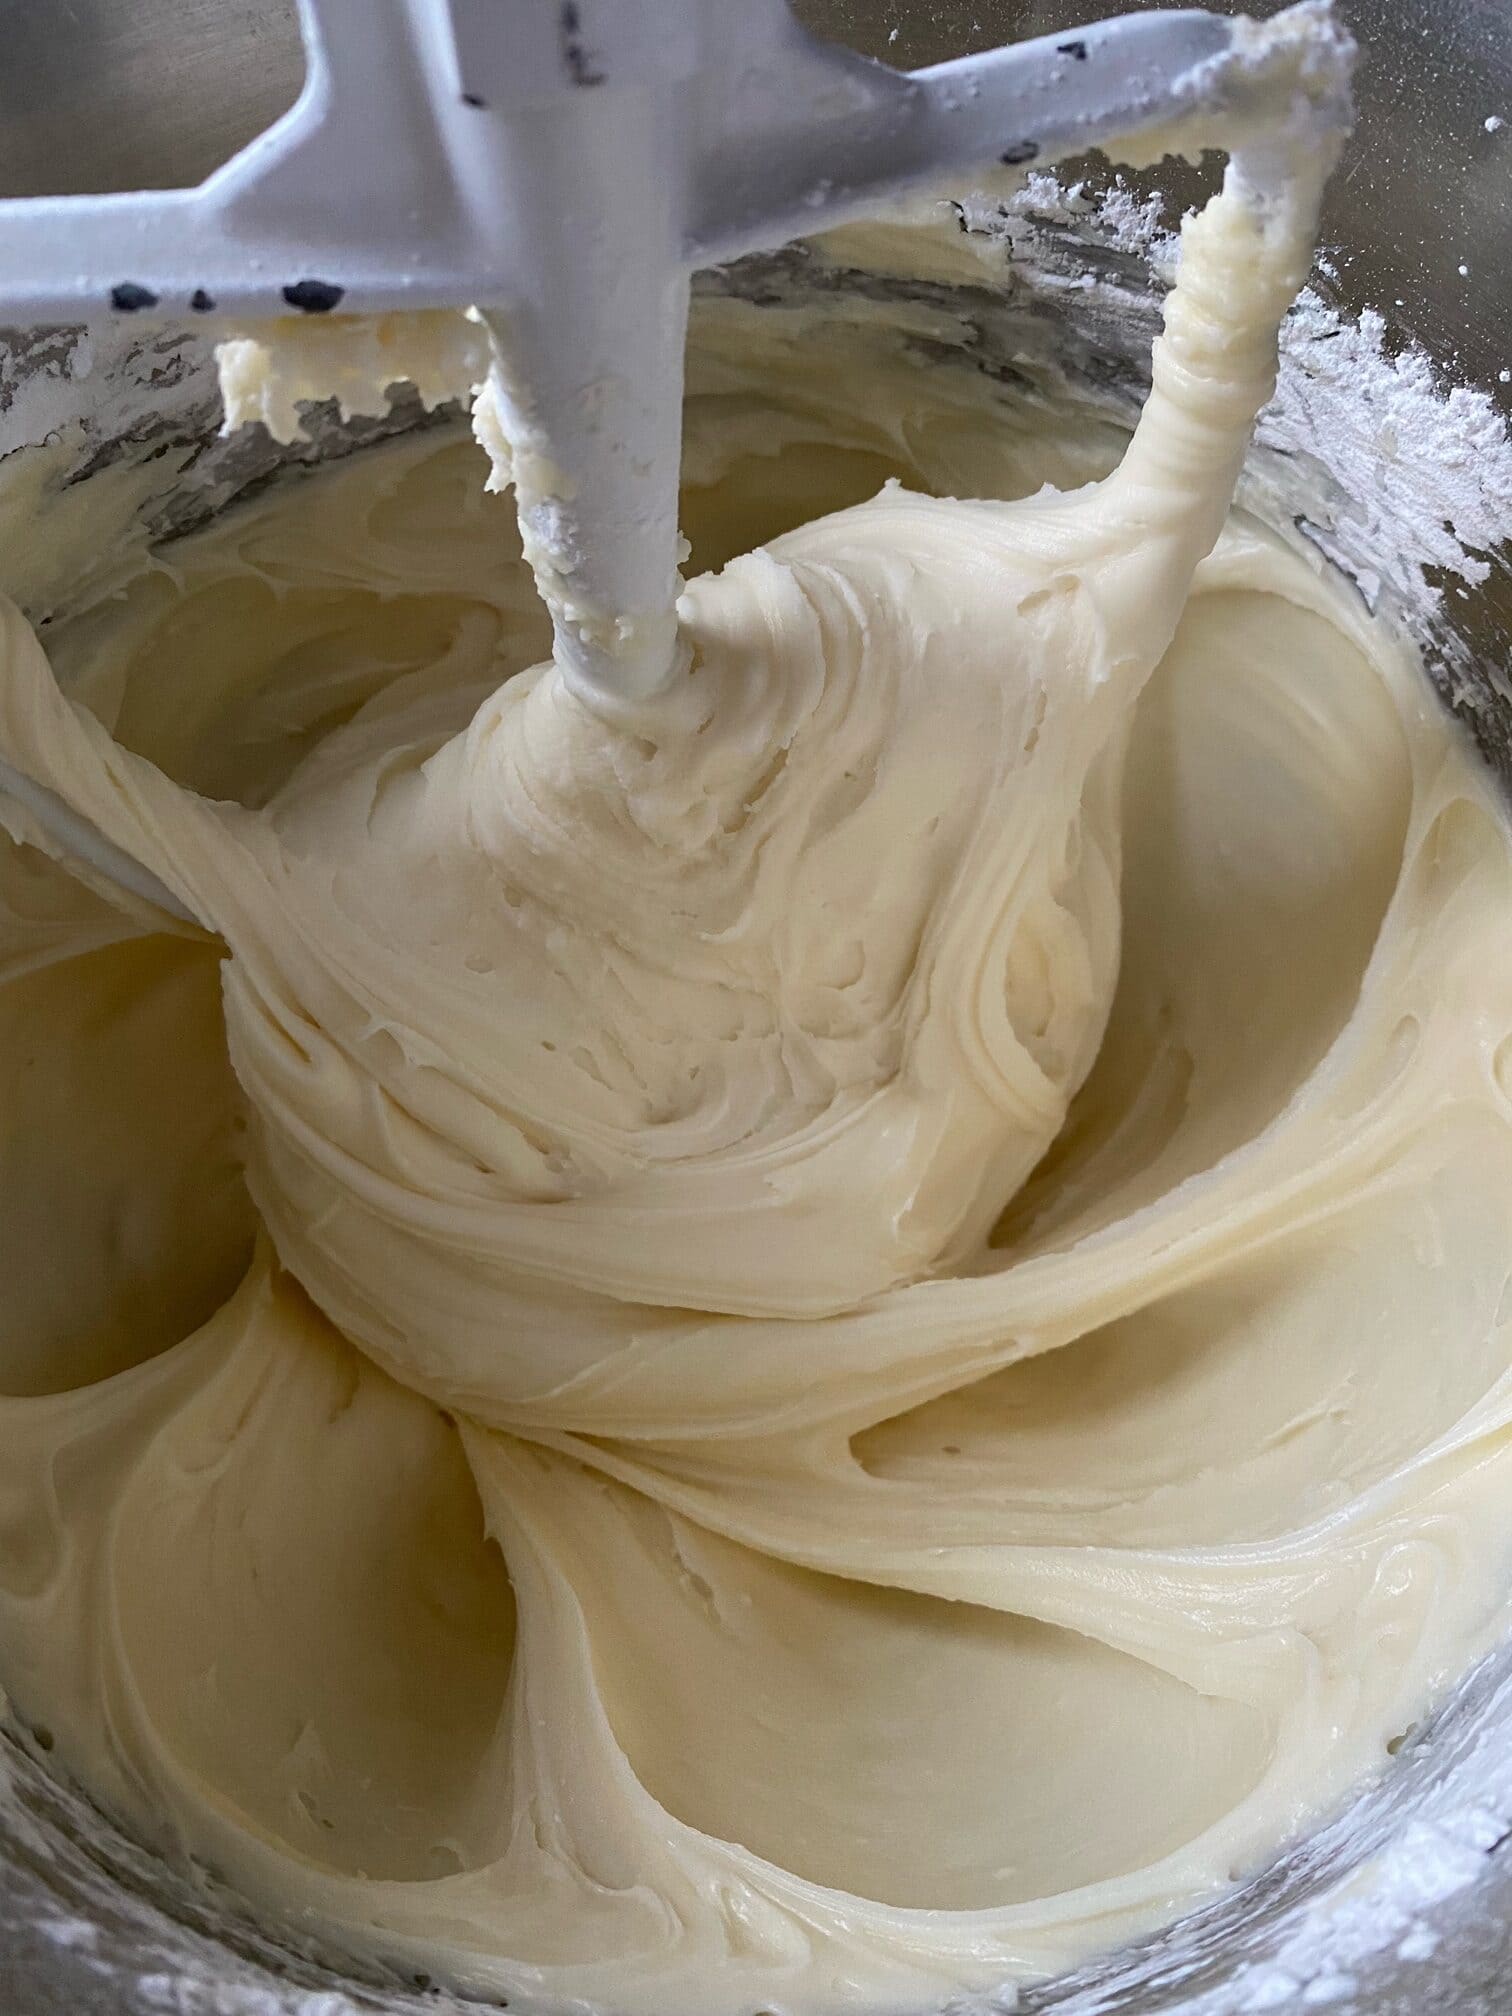 Cream cheese frosting in a mixing bowl to a mixer.  The paddle attachment is being used.